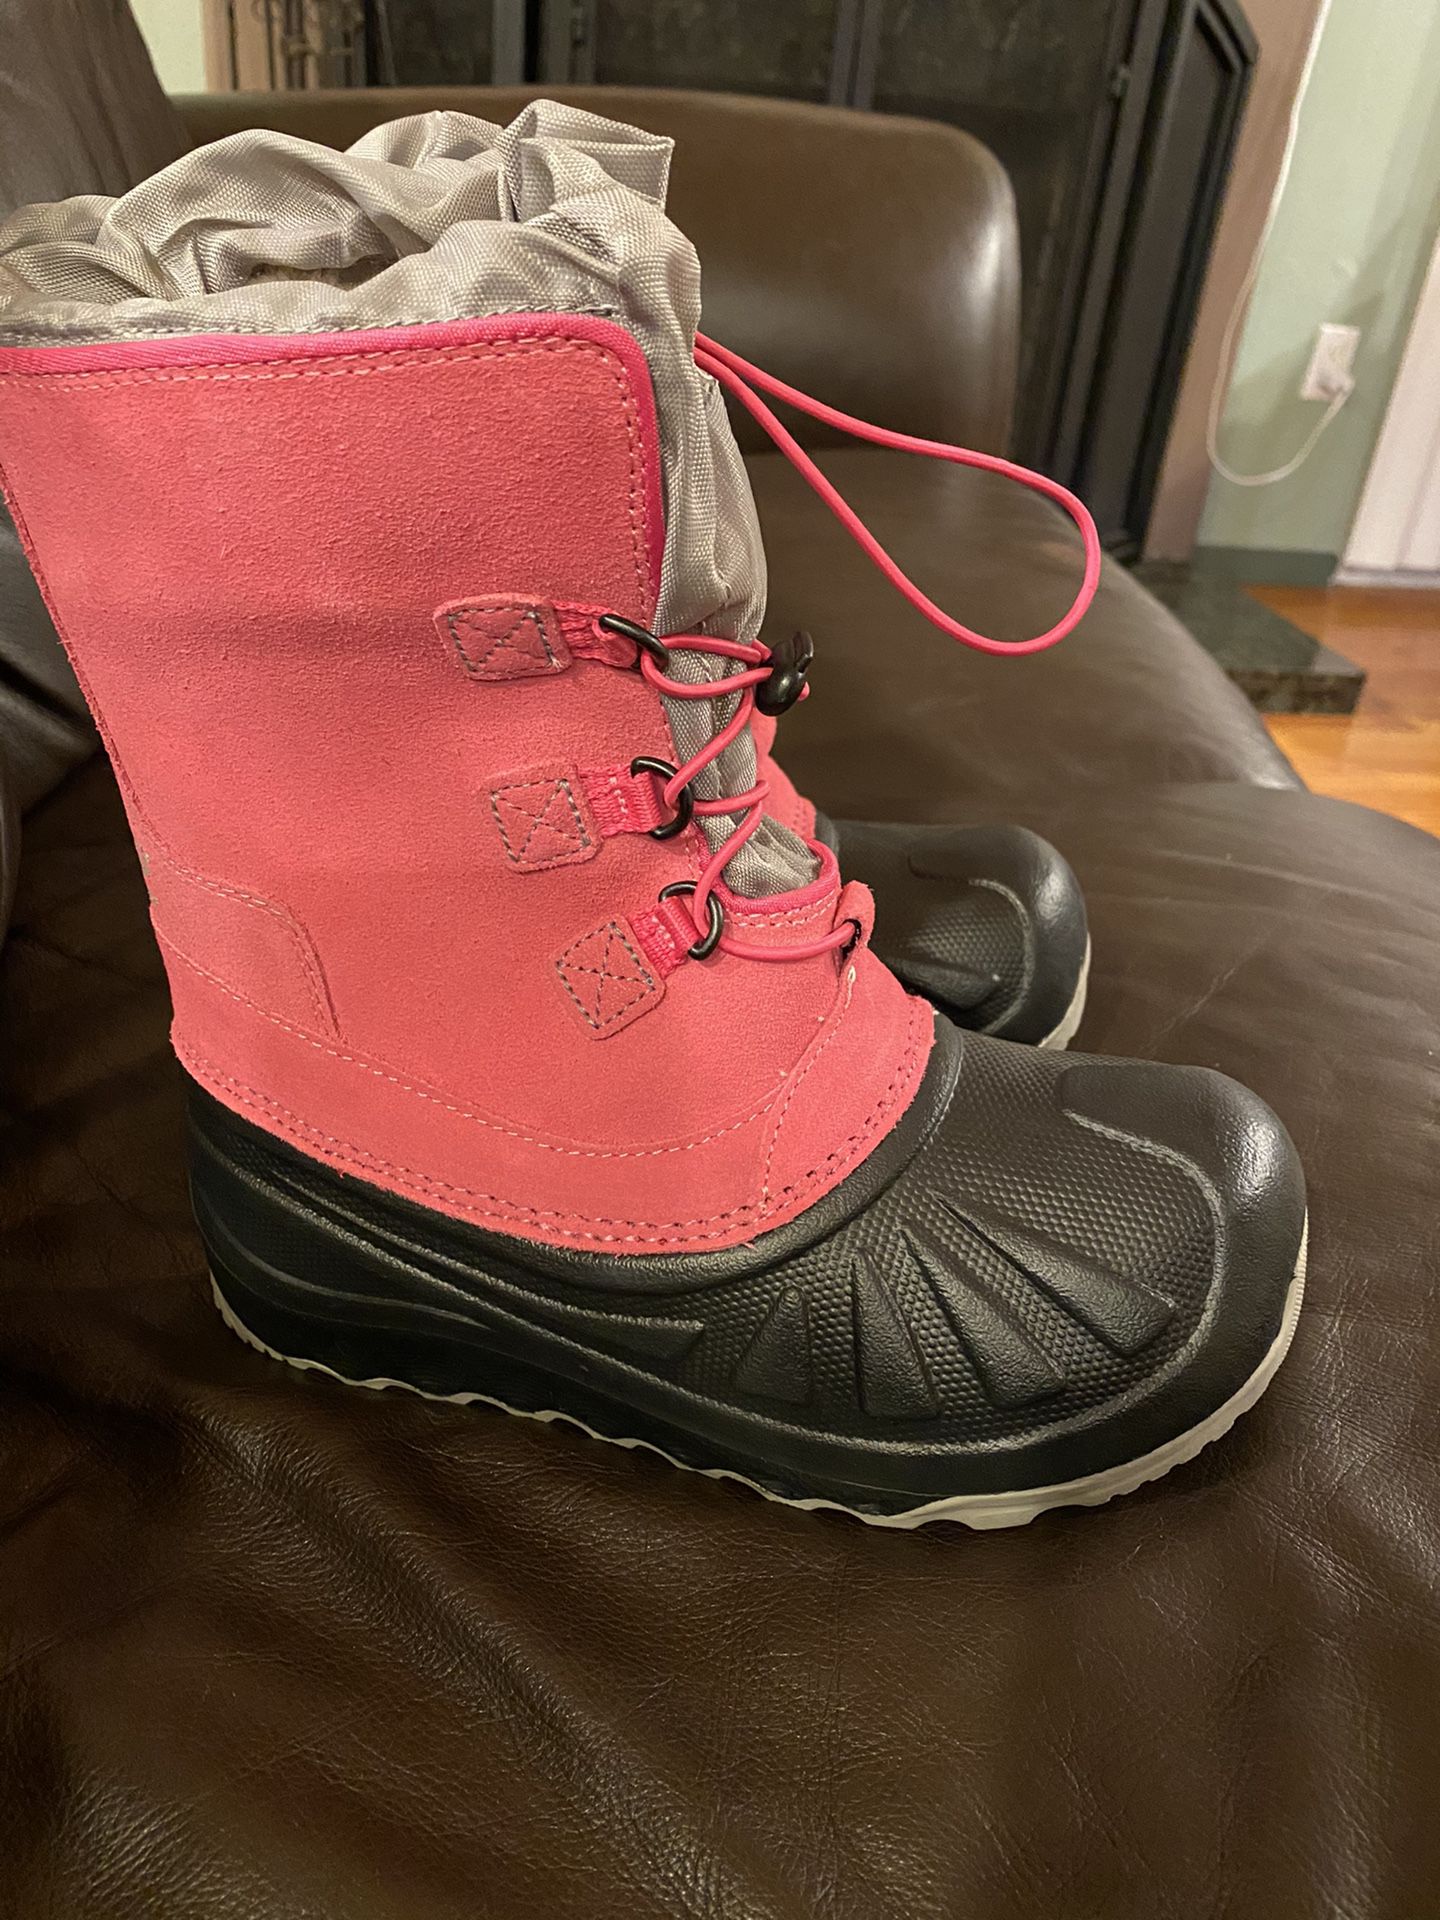 UGG Snow Boots in Pink!- Big Girl’s size 4. Never Worn $40